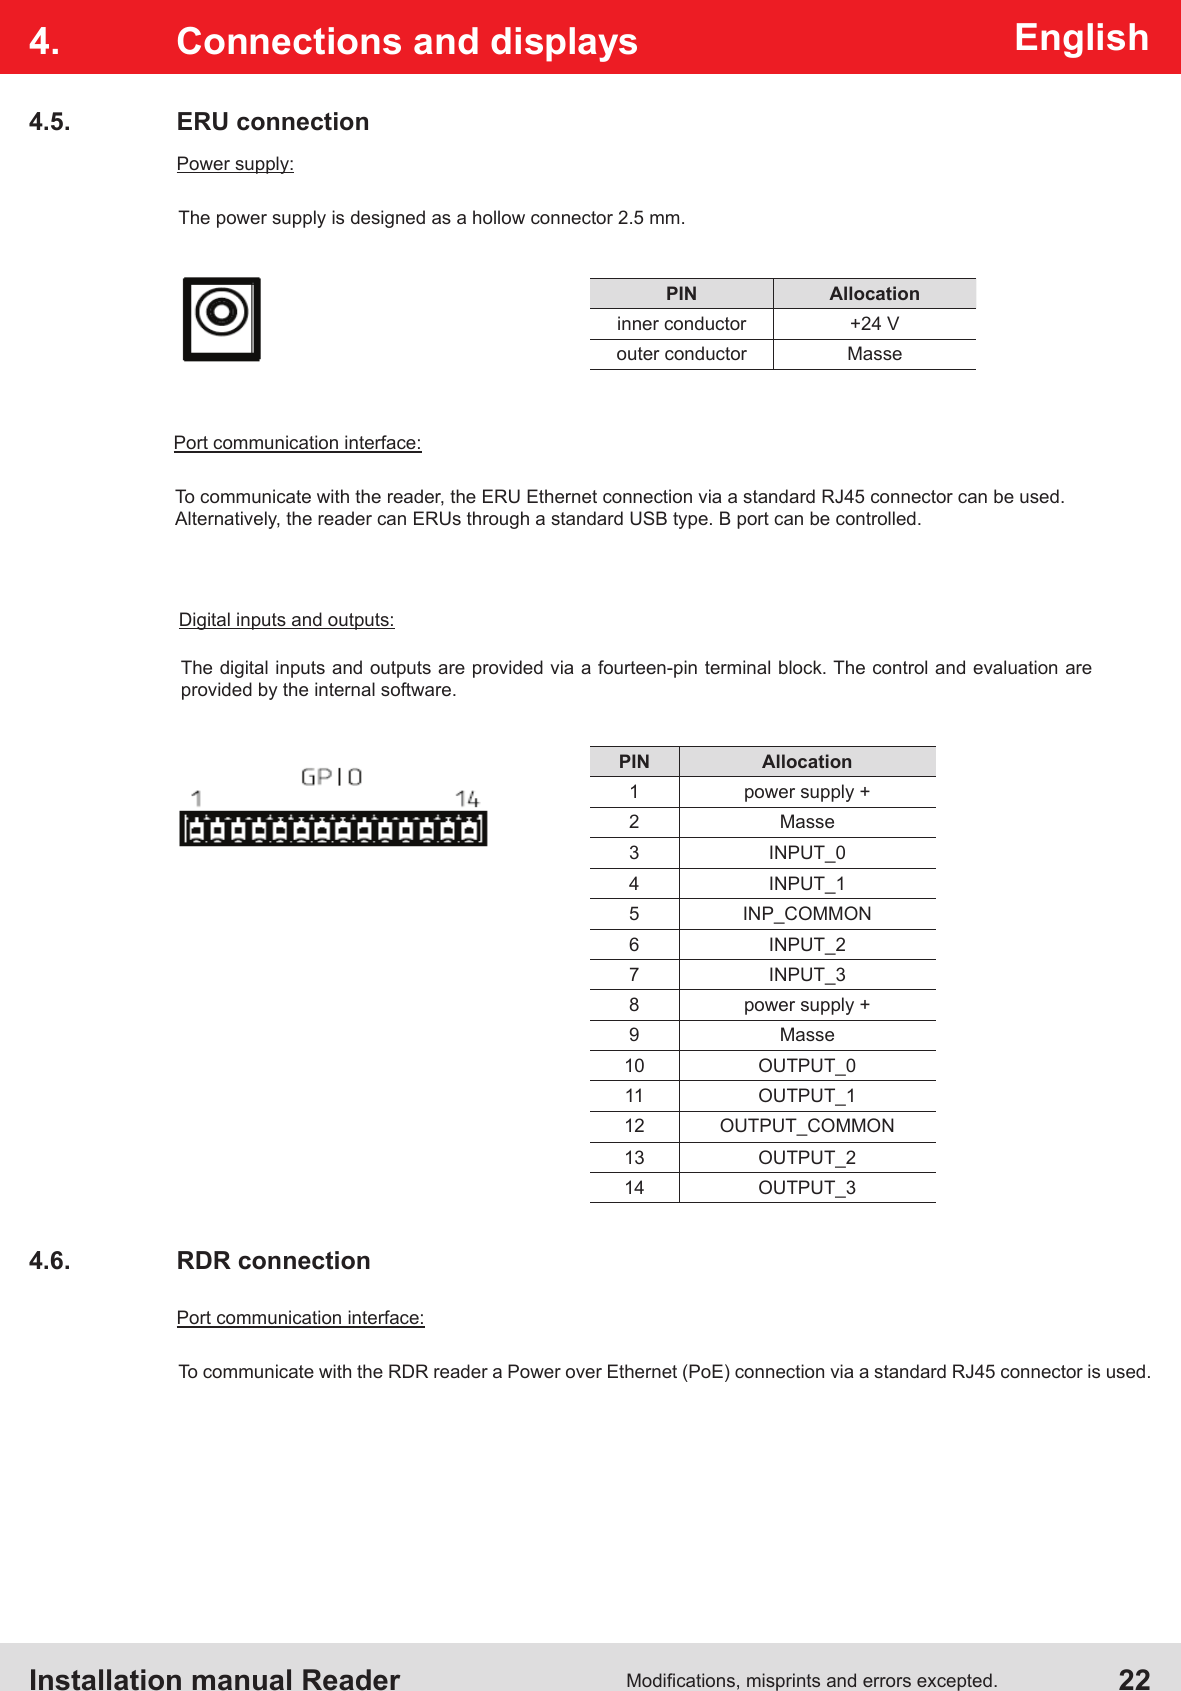 Installation manual Reader  22Modications, misprints and errors excepted.English4.  Connections and displays4.5.  ERU connectionPIN Allocation1 power supply +2 Masse3 INPUT_04 INPUT_15 INP_COMMON6 INPUT_27 INPUT_38 power supply +9 Masse10 OUTPUT_011 OUTPUT_112 OUTPUT_COMMON13 OUTPUT_214 OUTPUT_3Power supply:The power supply is designed as a hollow connector 2.5 mm.Digital inputs and outputs:The digital inputs and outputs are provided via a fourteen-pin terminal block. The control and evaluation are provided by the internal software.Port communication interface:To communicate with the reader, the ERU Ethernet connection via a standard RJ45 connector can be used.Alternatively, the reader can ERUs through a standard USB type. B port can be controlled.4.6.  RDR connectionPort communication interface:To communicate with the RDR reader a Power over Ethernet (PoE) connection via a standard RJ45 connector is used.PIN Allocationinner conductor +24 Vouter conductor Masse